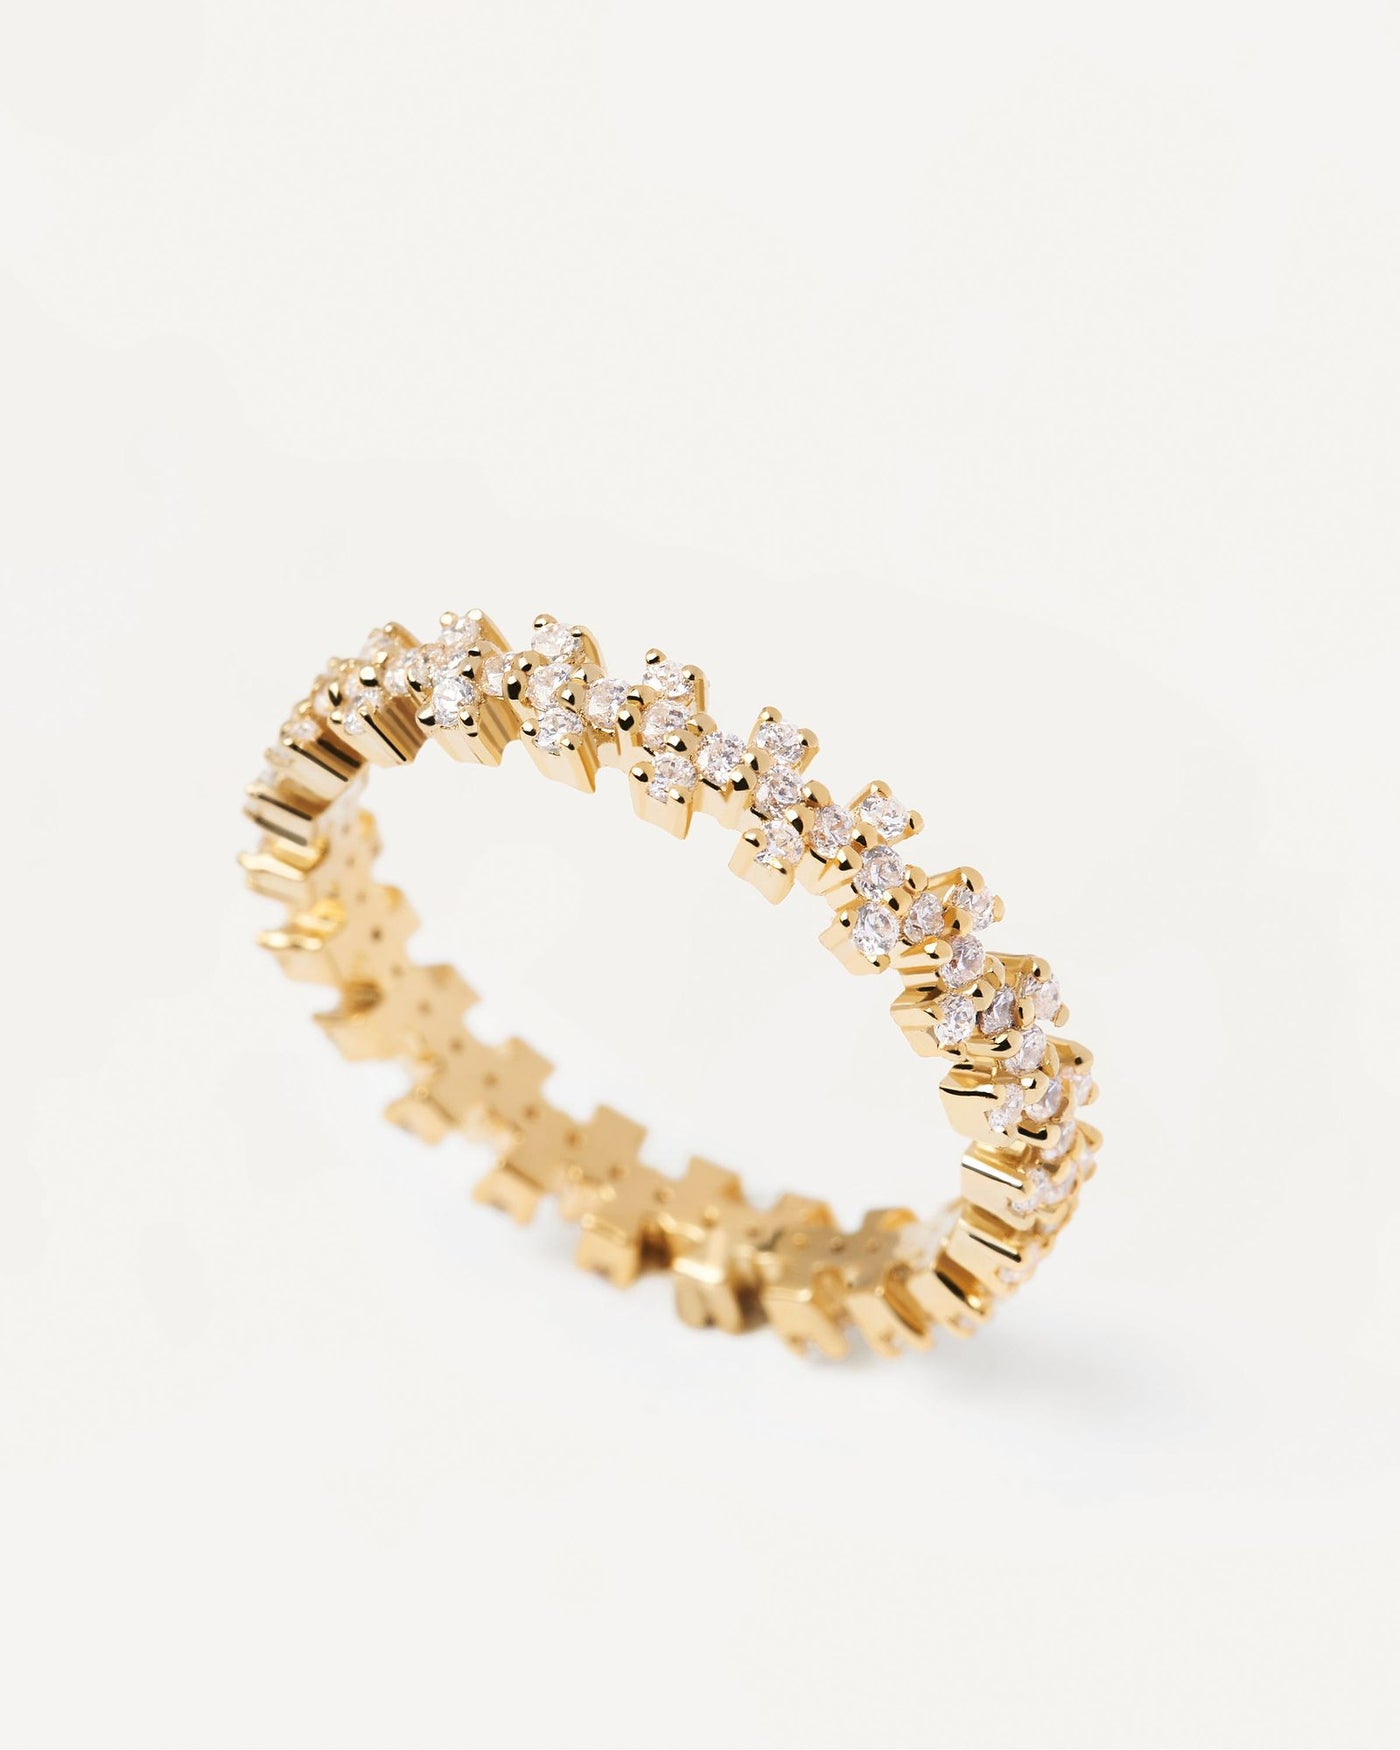 2024 Selection | Crown Ring. Gold-plated eternity ring with crown shape. Get the latest arrival from PDPAOLA. Place your order safely and get this Best Seller. Free Shipping.